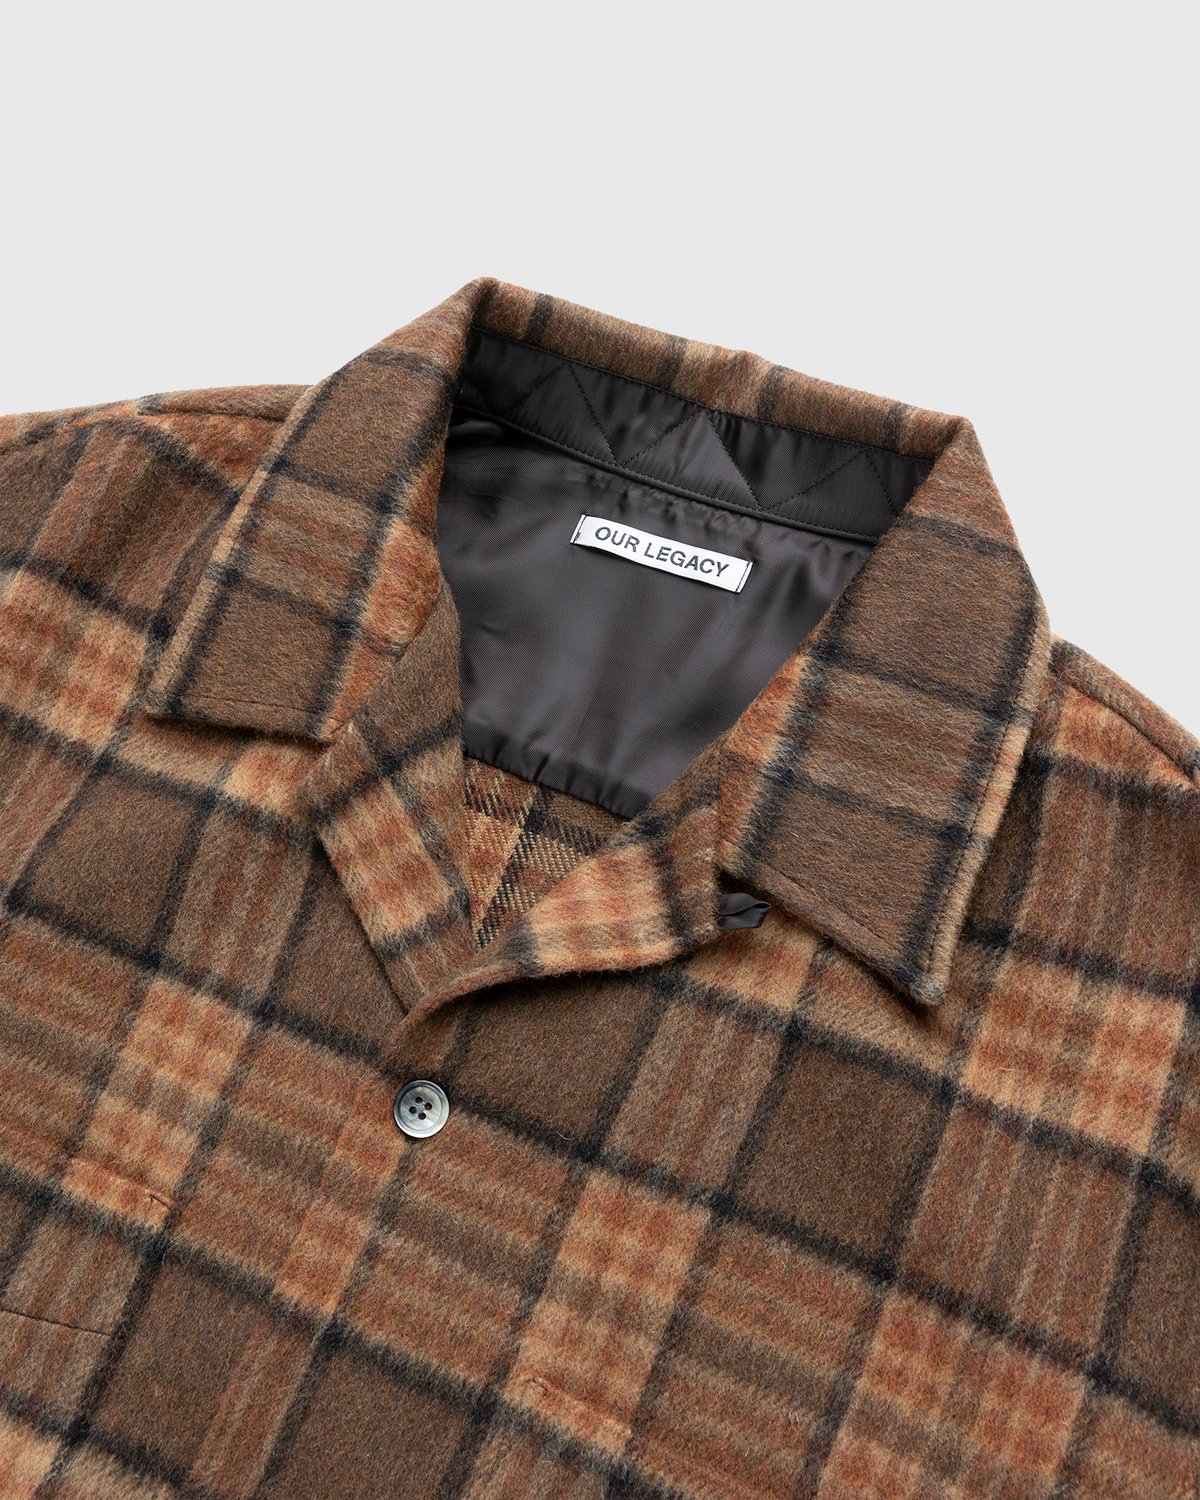 Our Legacy - Heusen Shirt Fox Brown Check - Clothing - Brown - Image 3